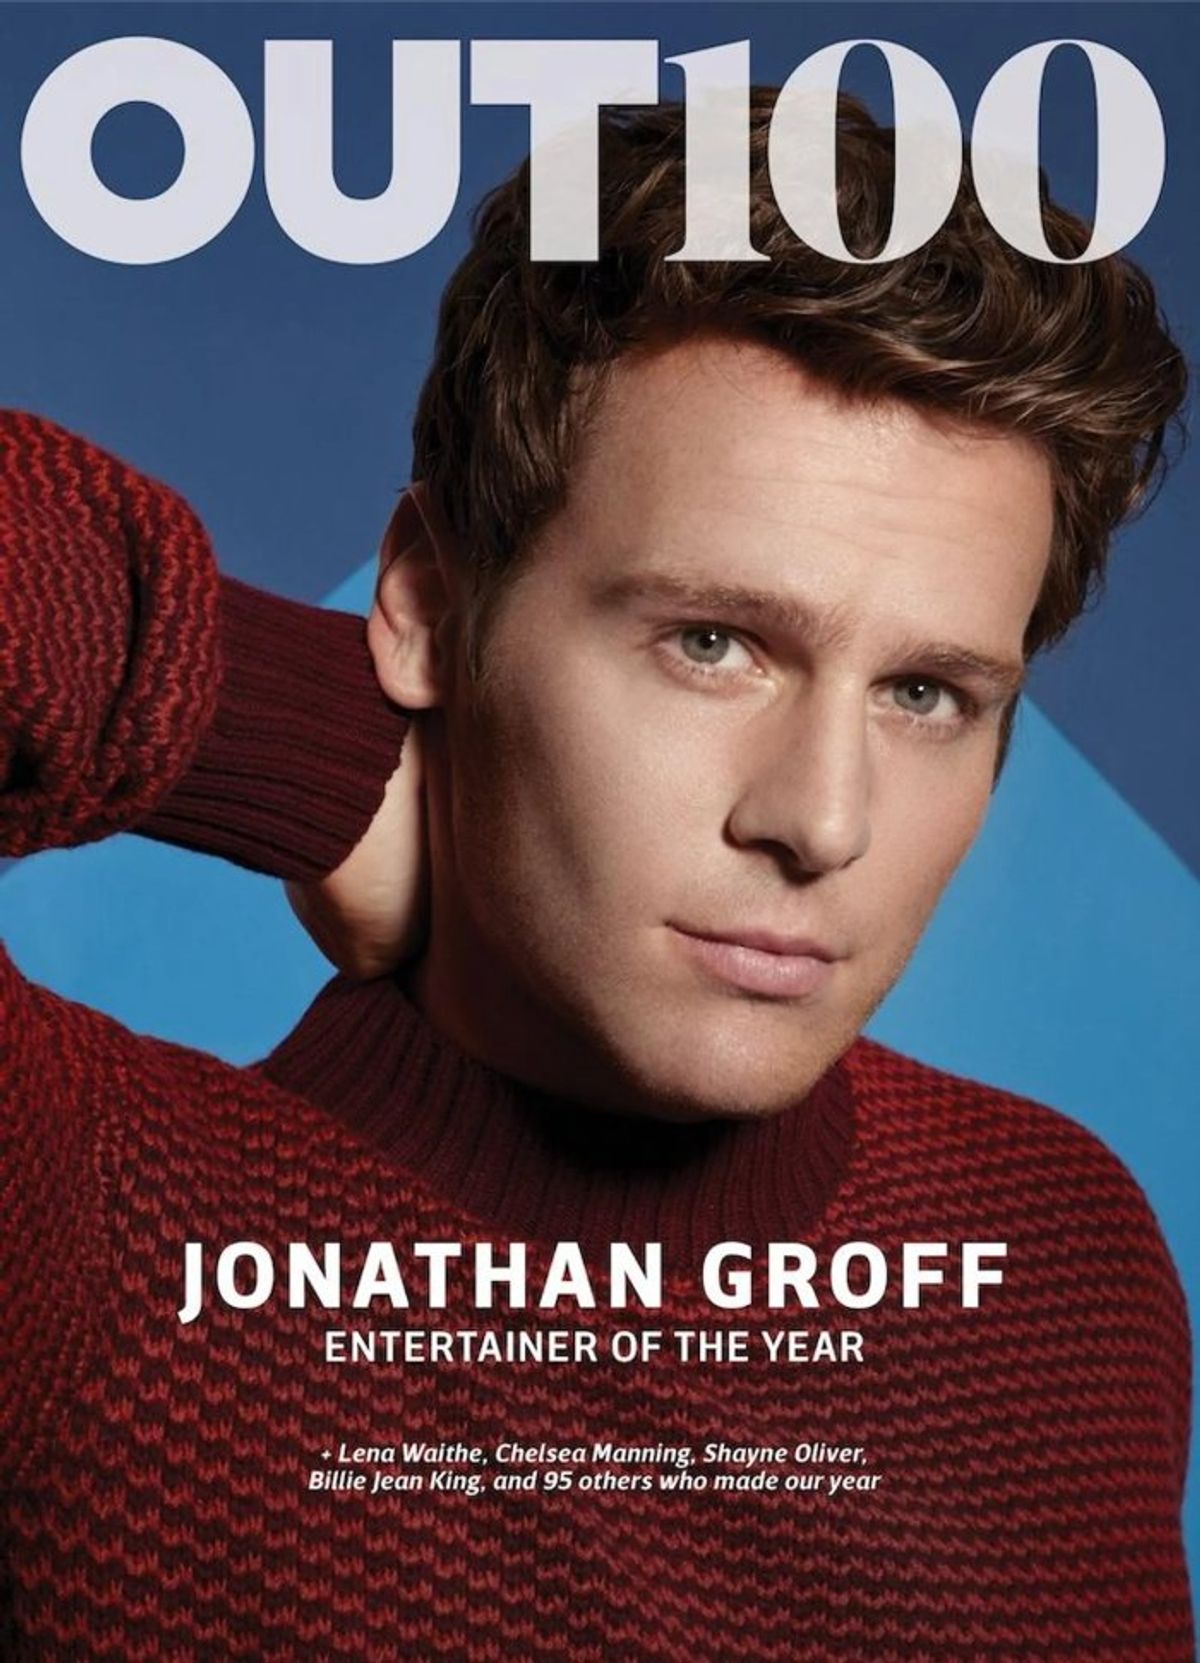 
Actor & heartthrob Jonathan Groff's career reached new heights in 2017
